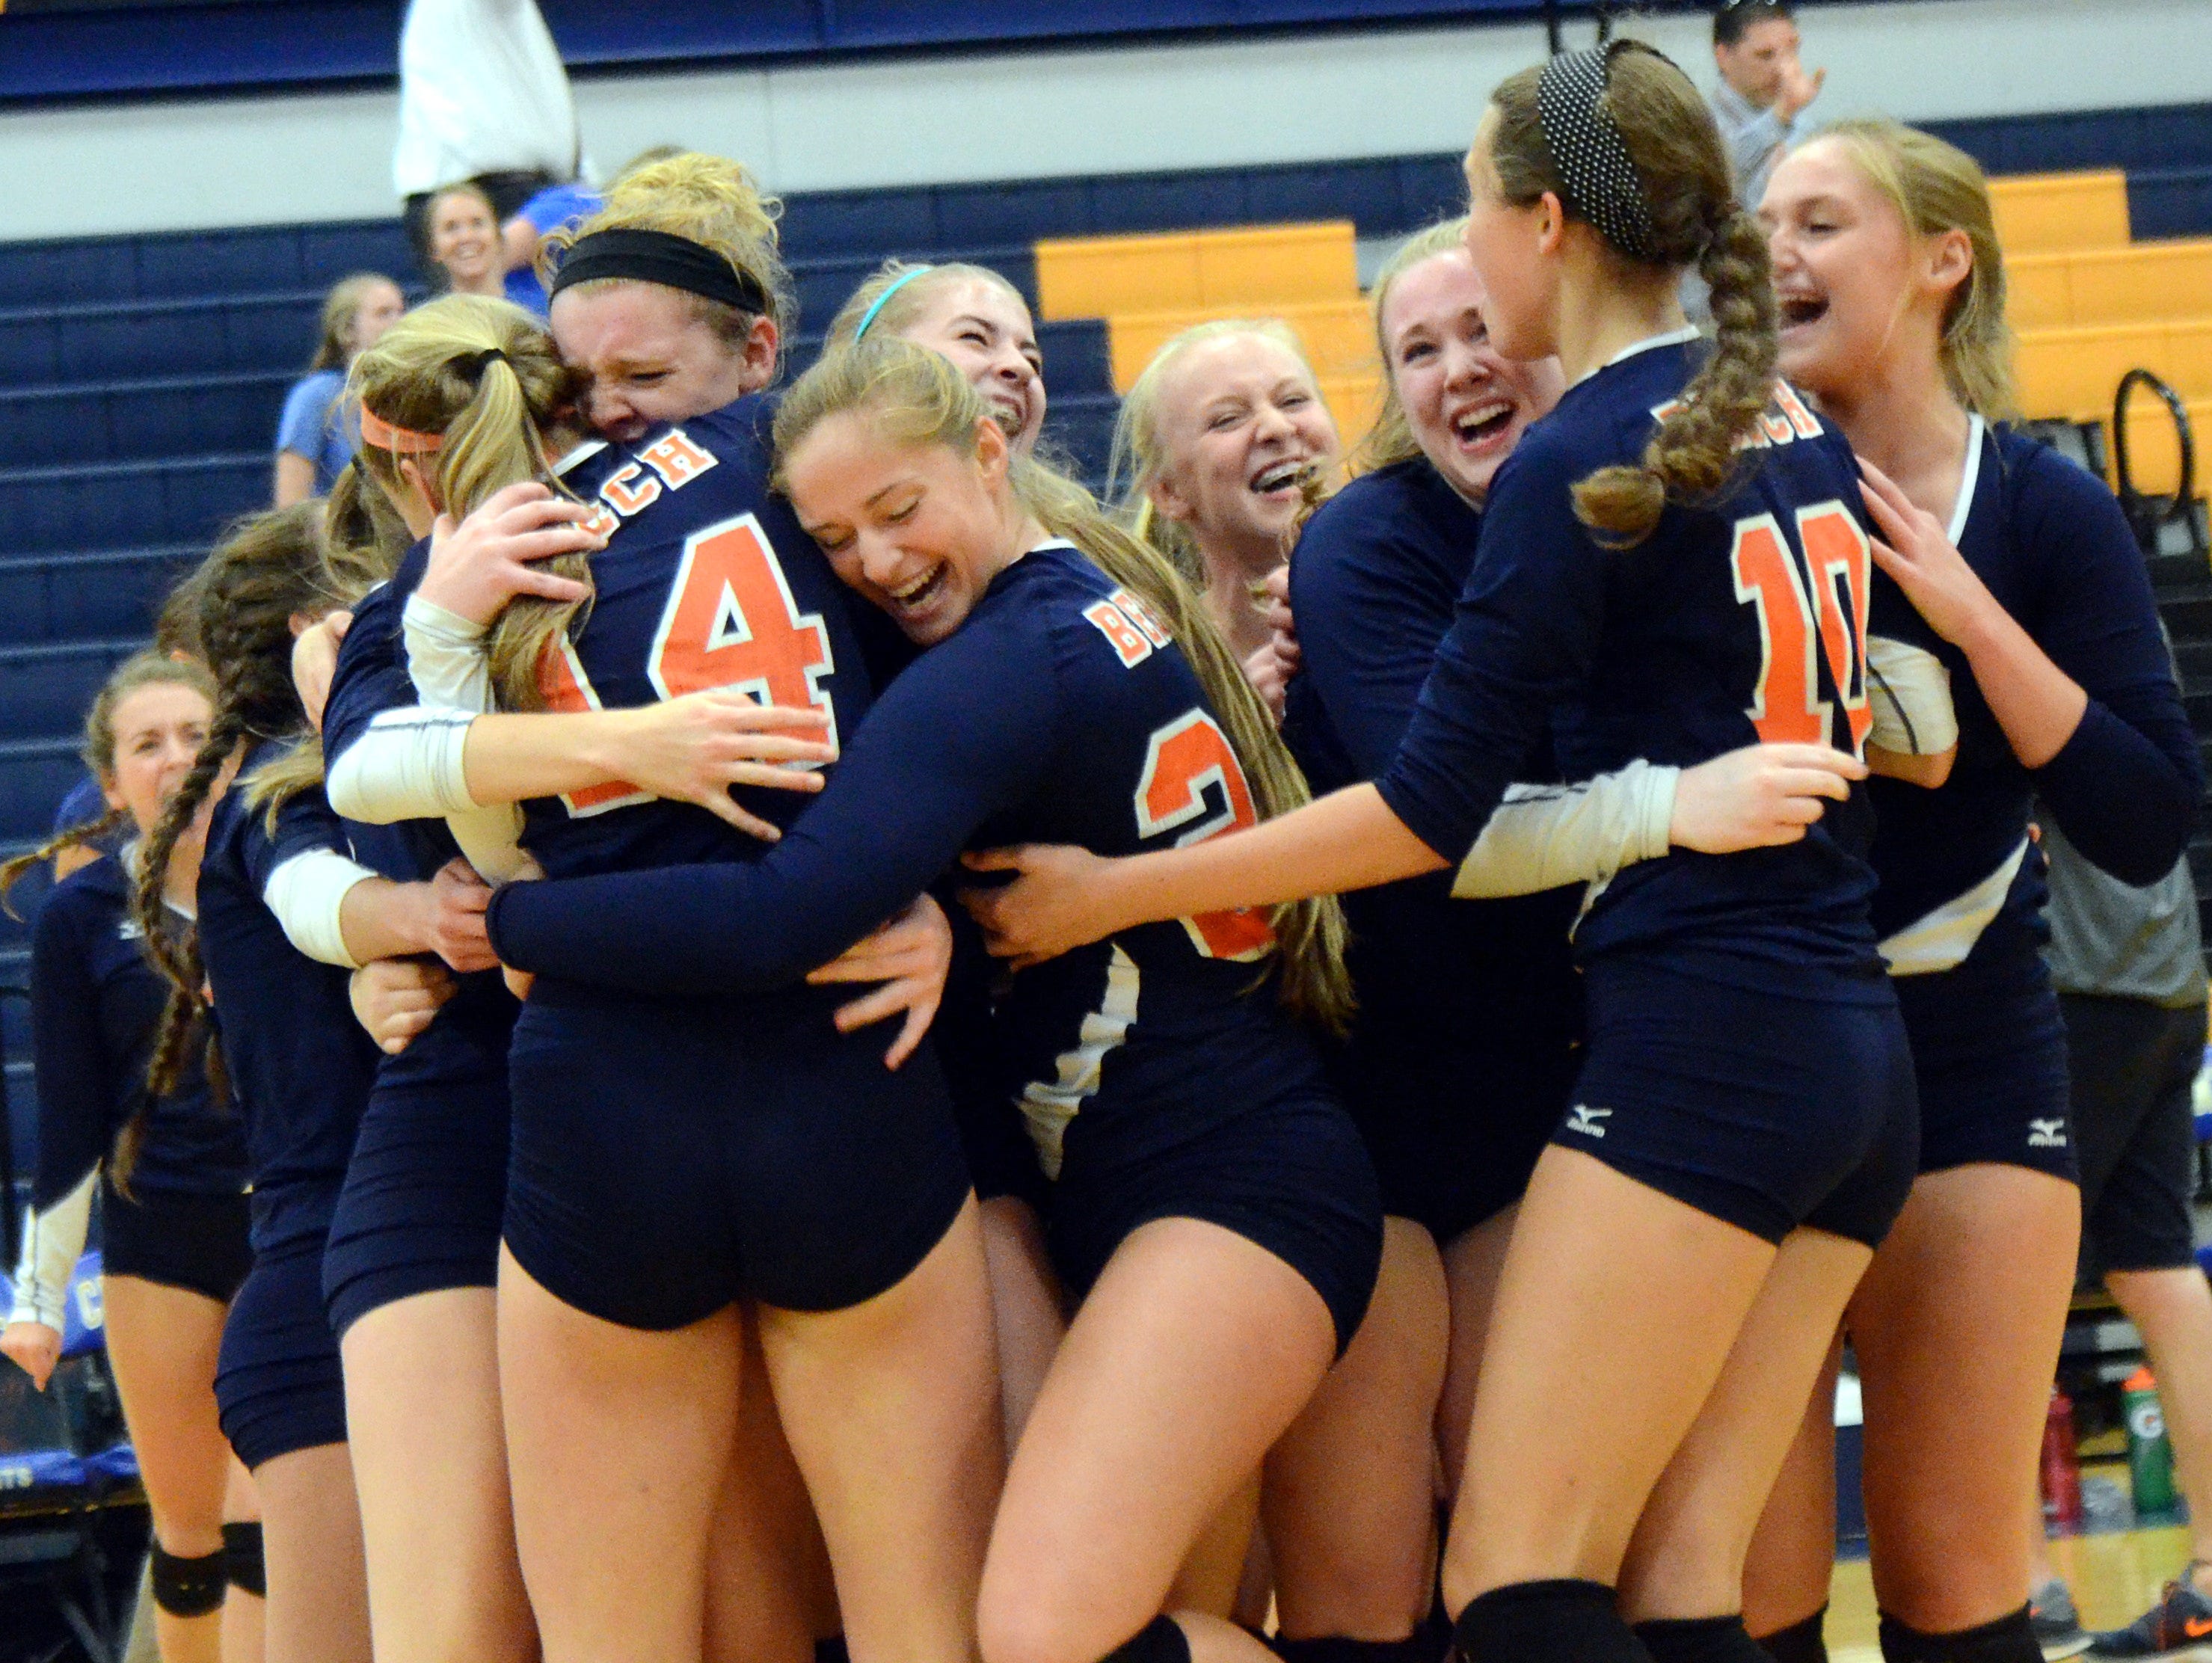 The Beech High School volleyball team celebrates after winning the District 9-AAA Tournament on Thursday evening.